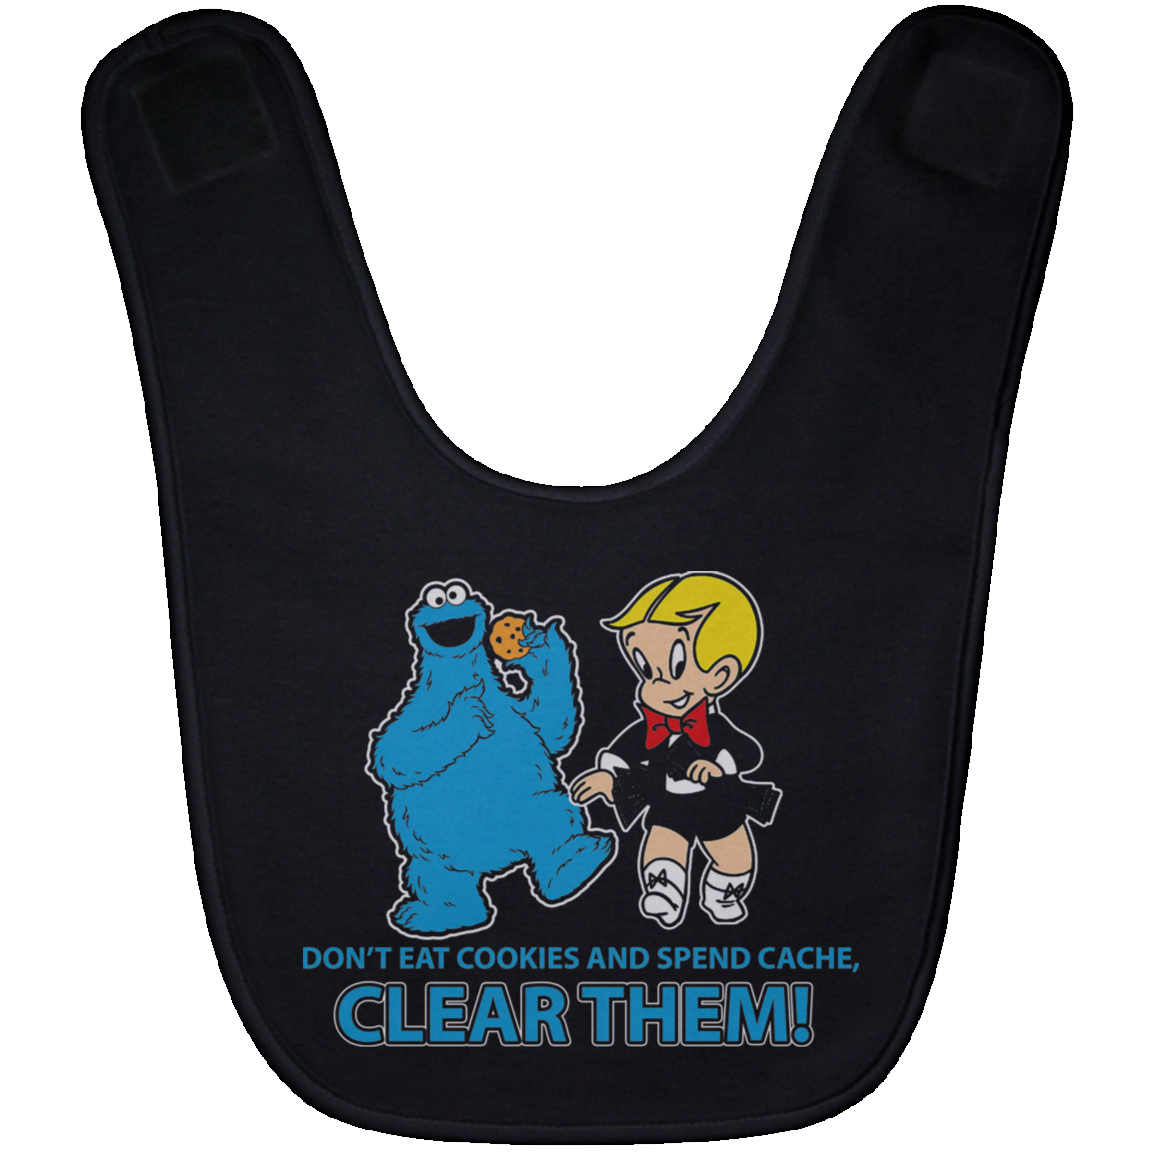 ArtichokeUSA Custom Design. Don't Eat Cookies And Spend Cache! Delete Them! Cookie Monster and Richie Rich Fan Art/Parody. Baby Bib